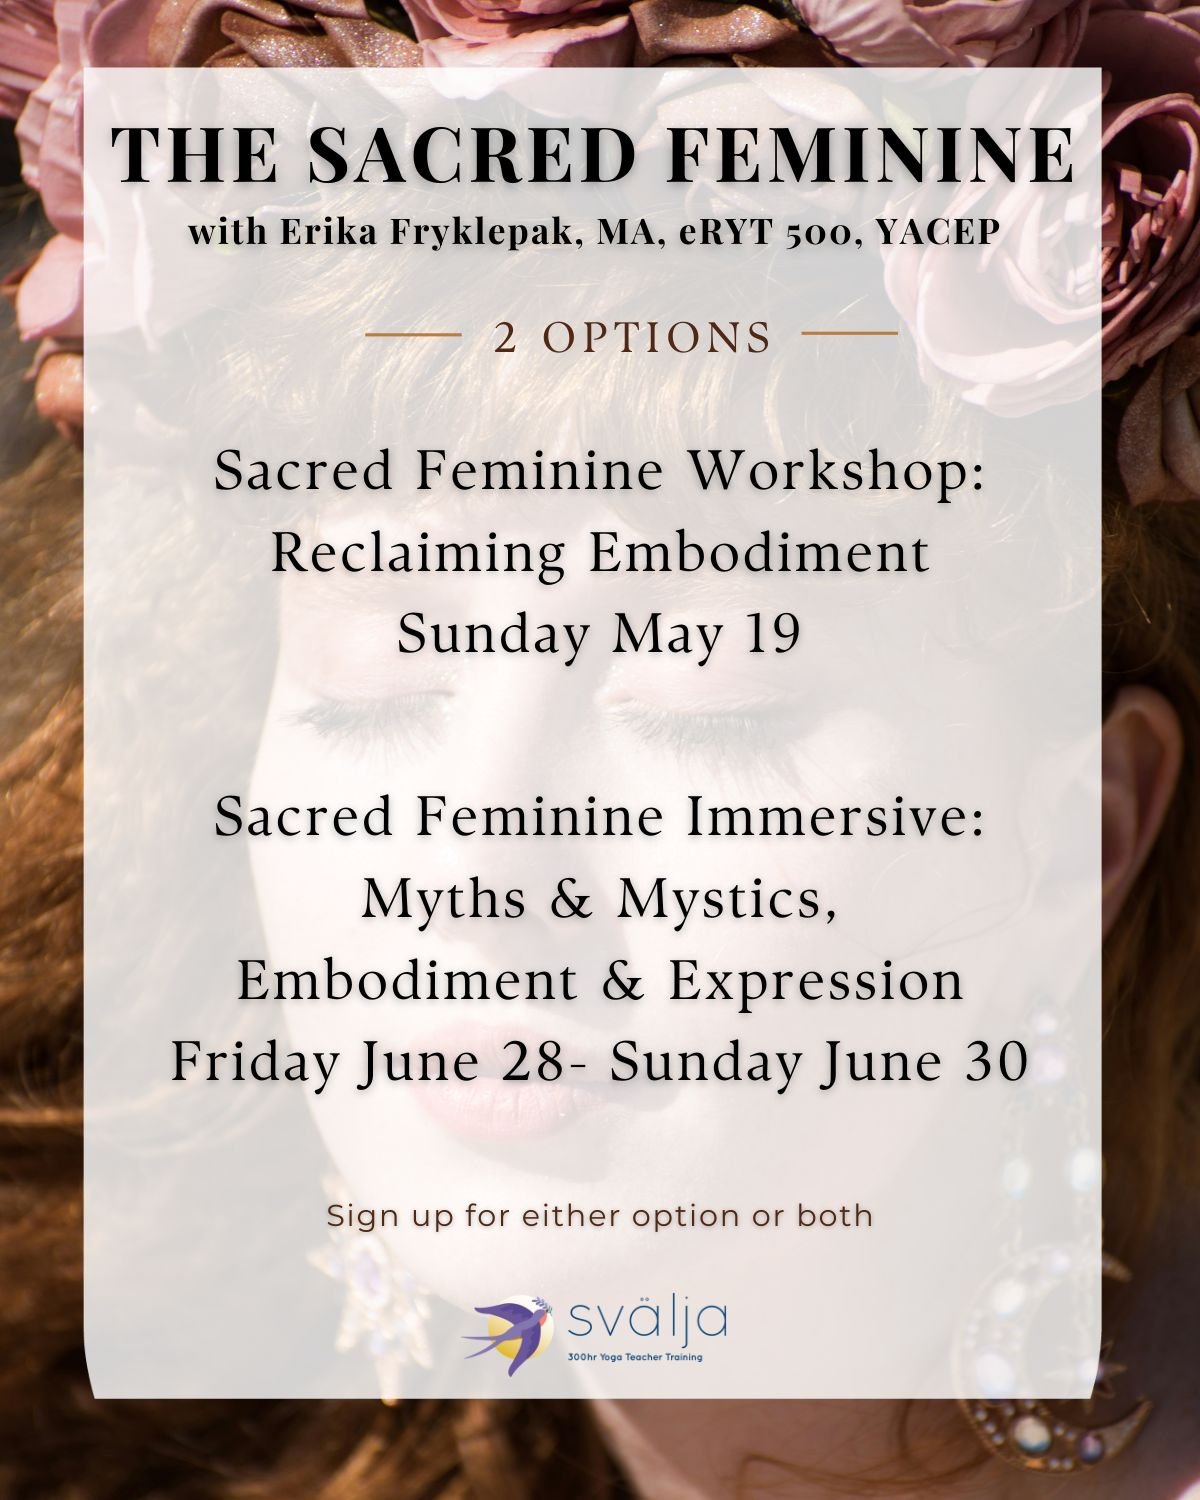 The Sacred Feminine
Join us for this incredibly rich opportunity. 

Led by Erika Fryklepak, MA, eRYT 500, YACEP
@heartofthemoon_sanctuary 

Intellectually Stimulating, with inquiry into myths and archetypes, societal constructs, and old/new modes of 